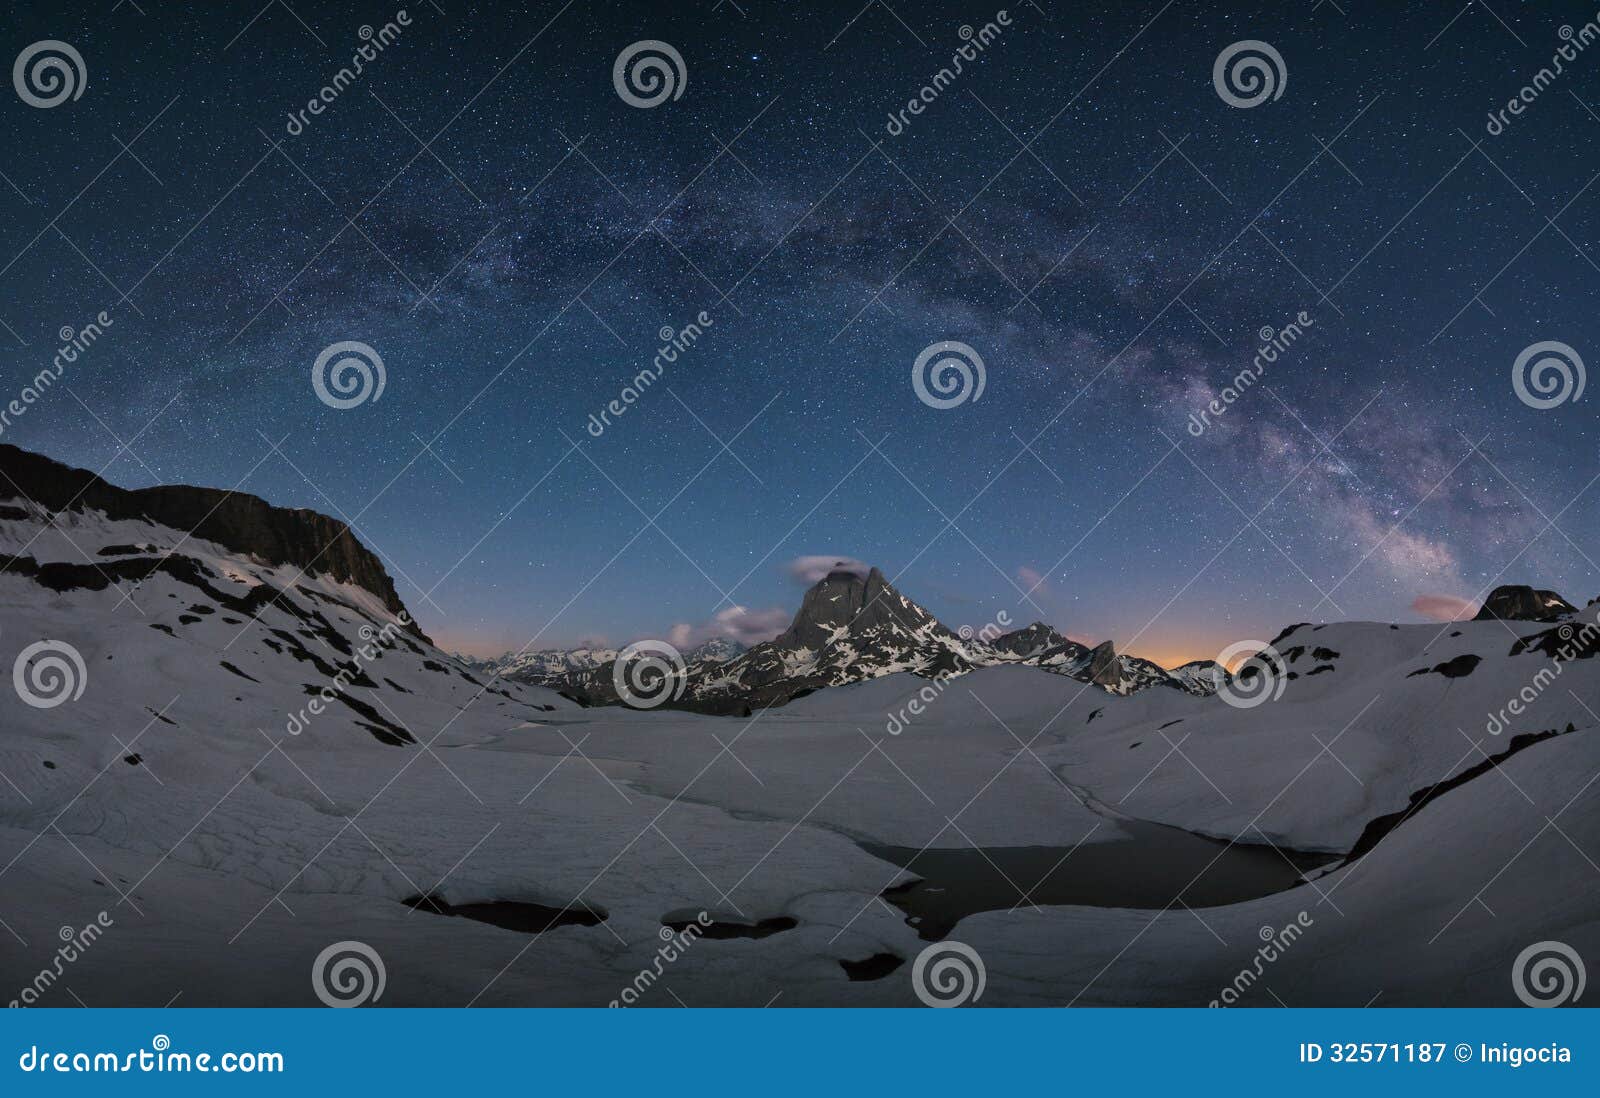 milky way over the mountains